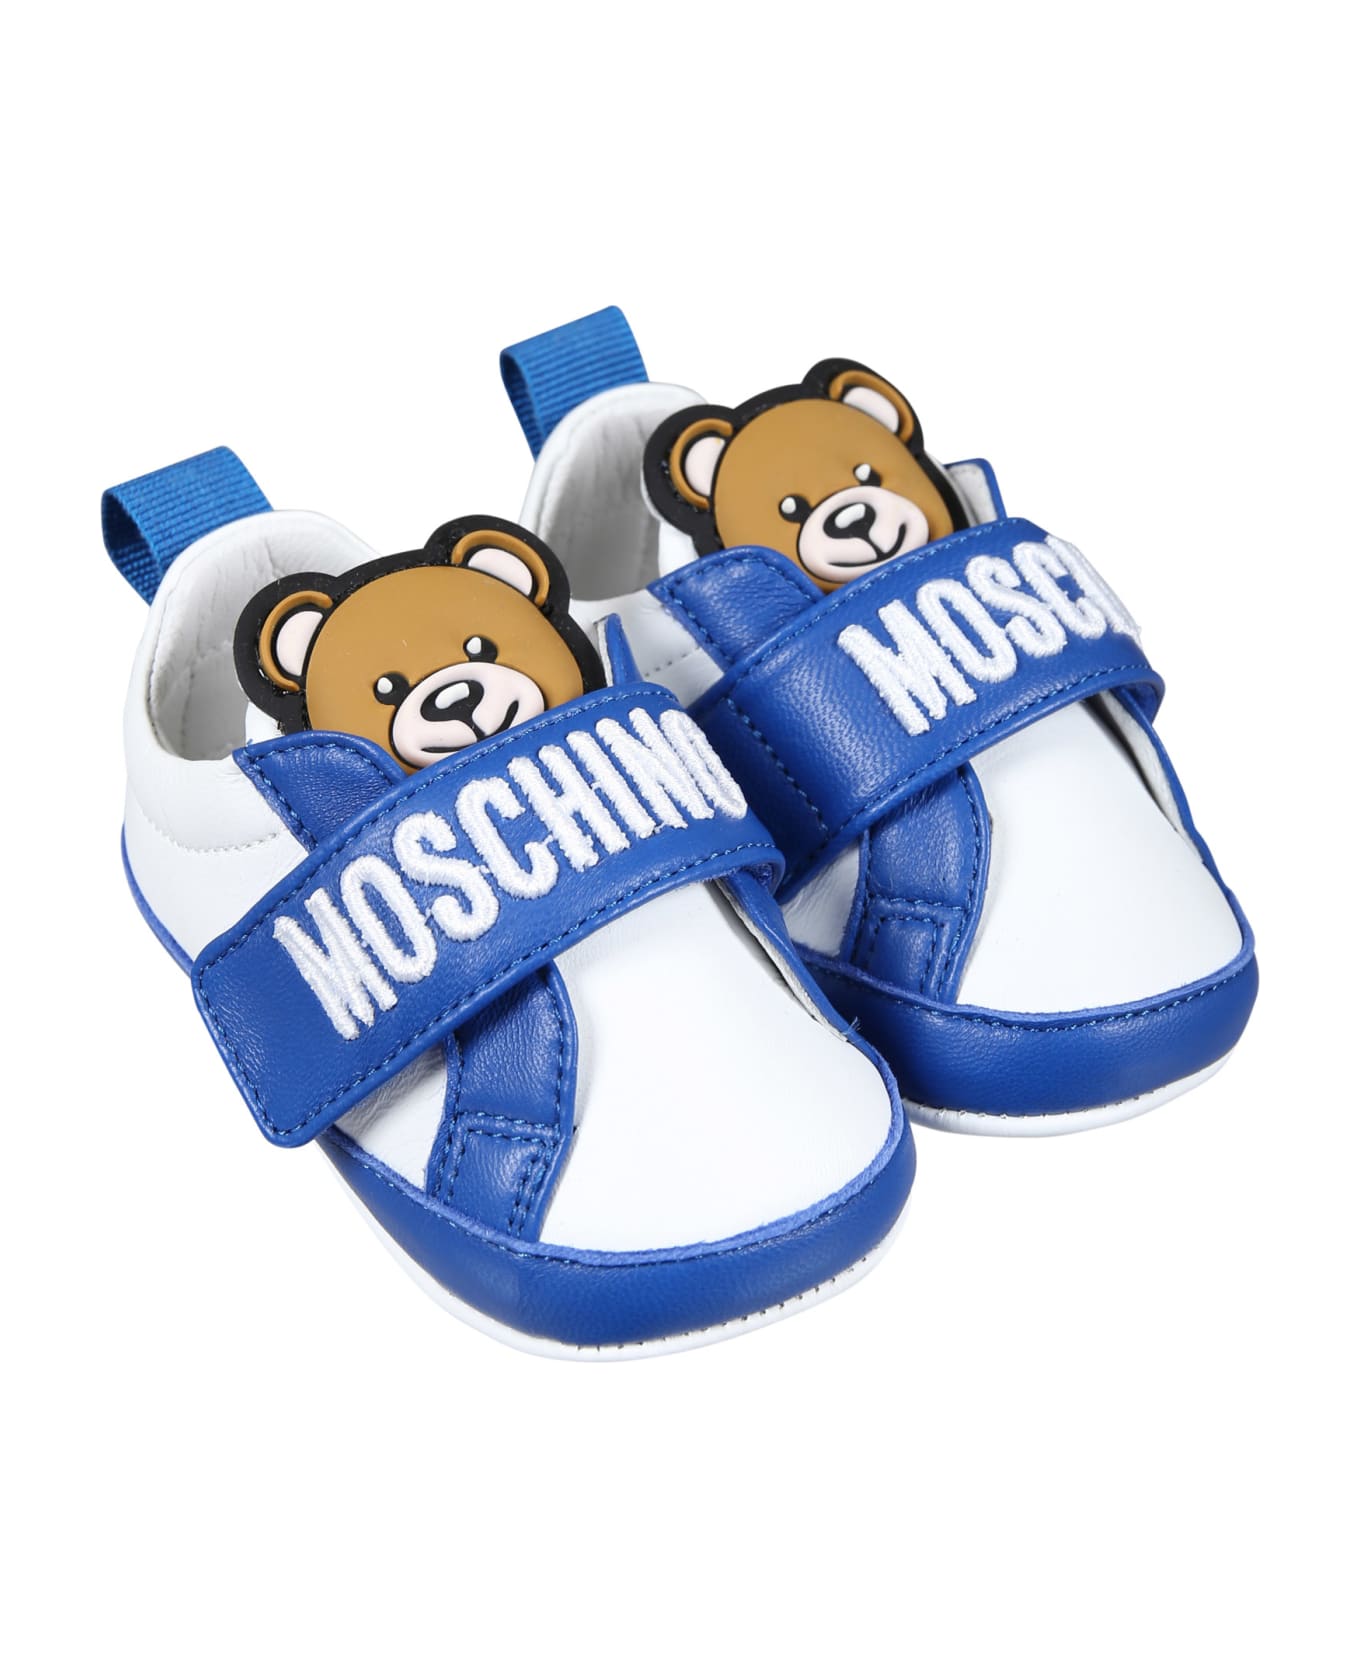 Moschino White Sneakers For Baby Boy With Teddy Bear - Light Blue